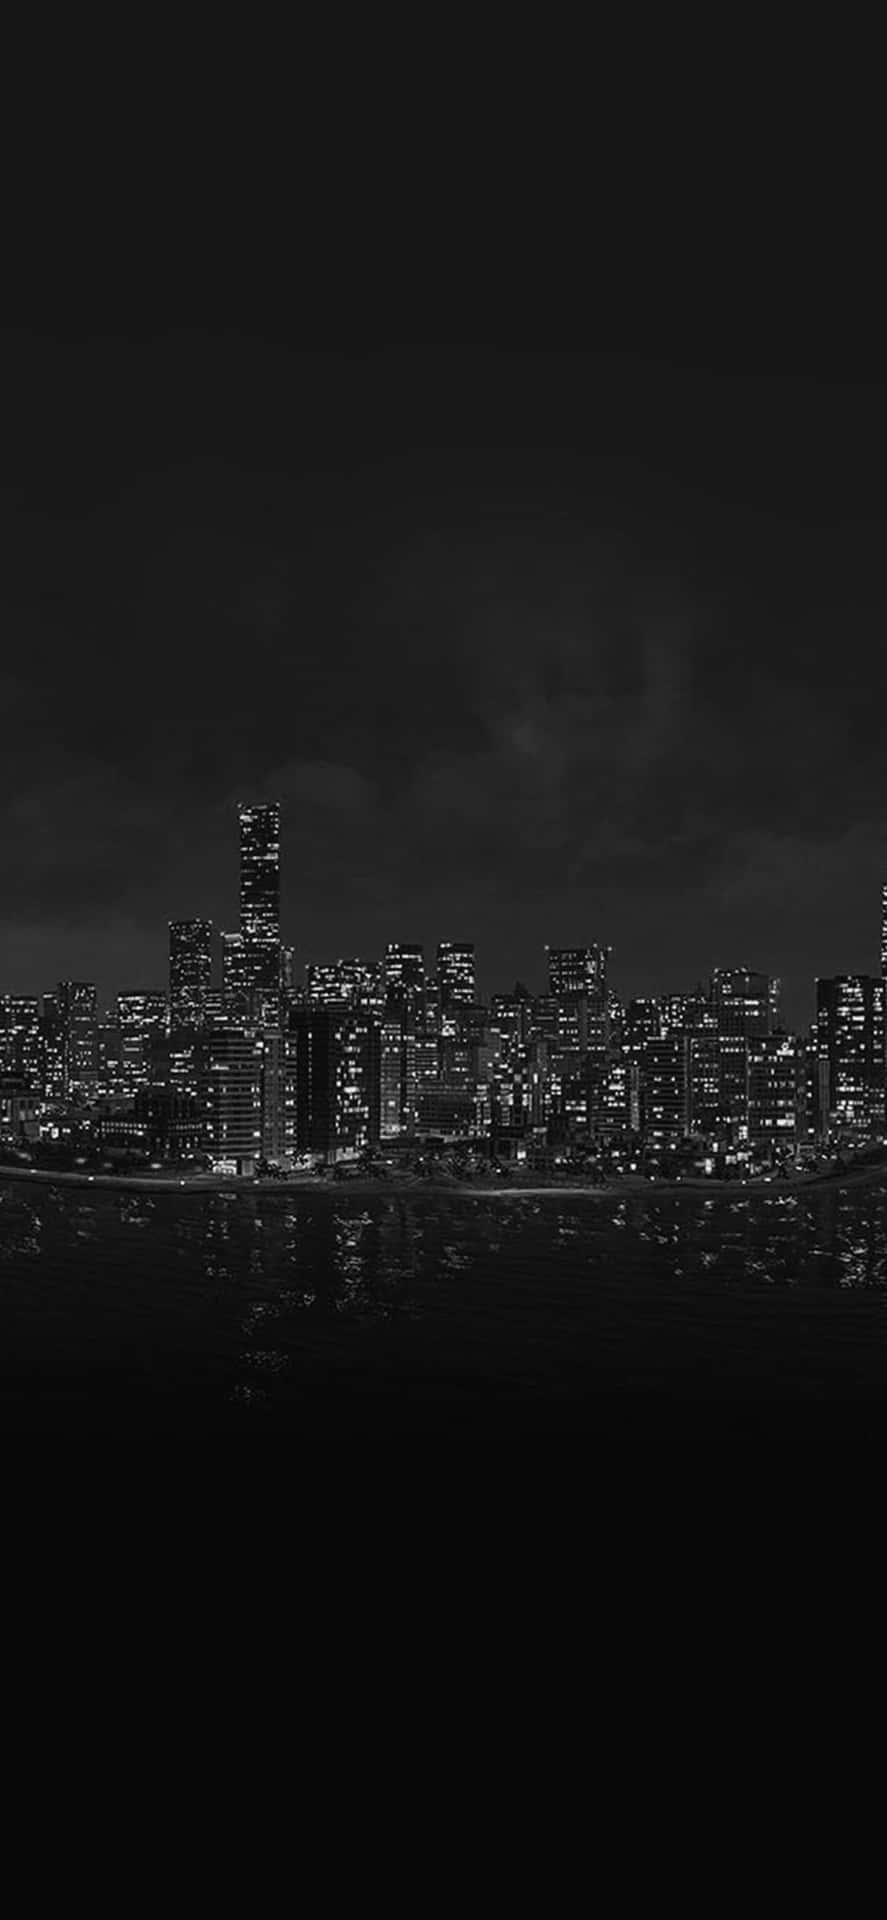 A Black And White Image Of A City Skyline Wallpaper